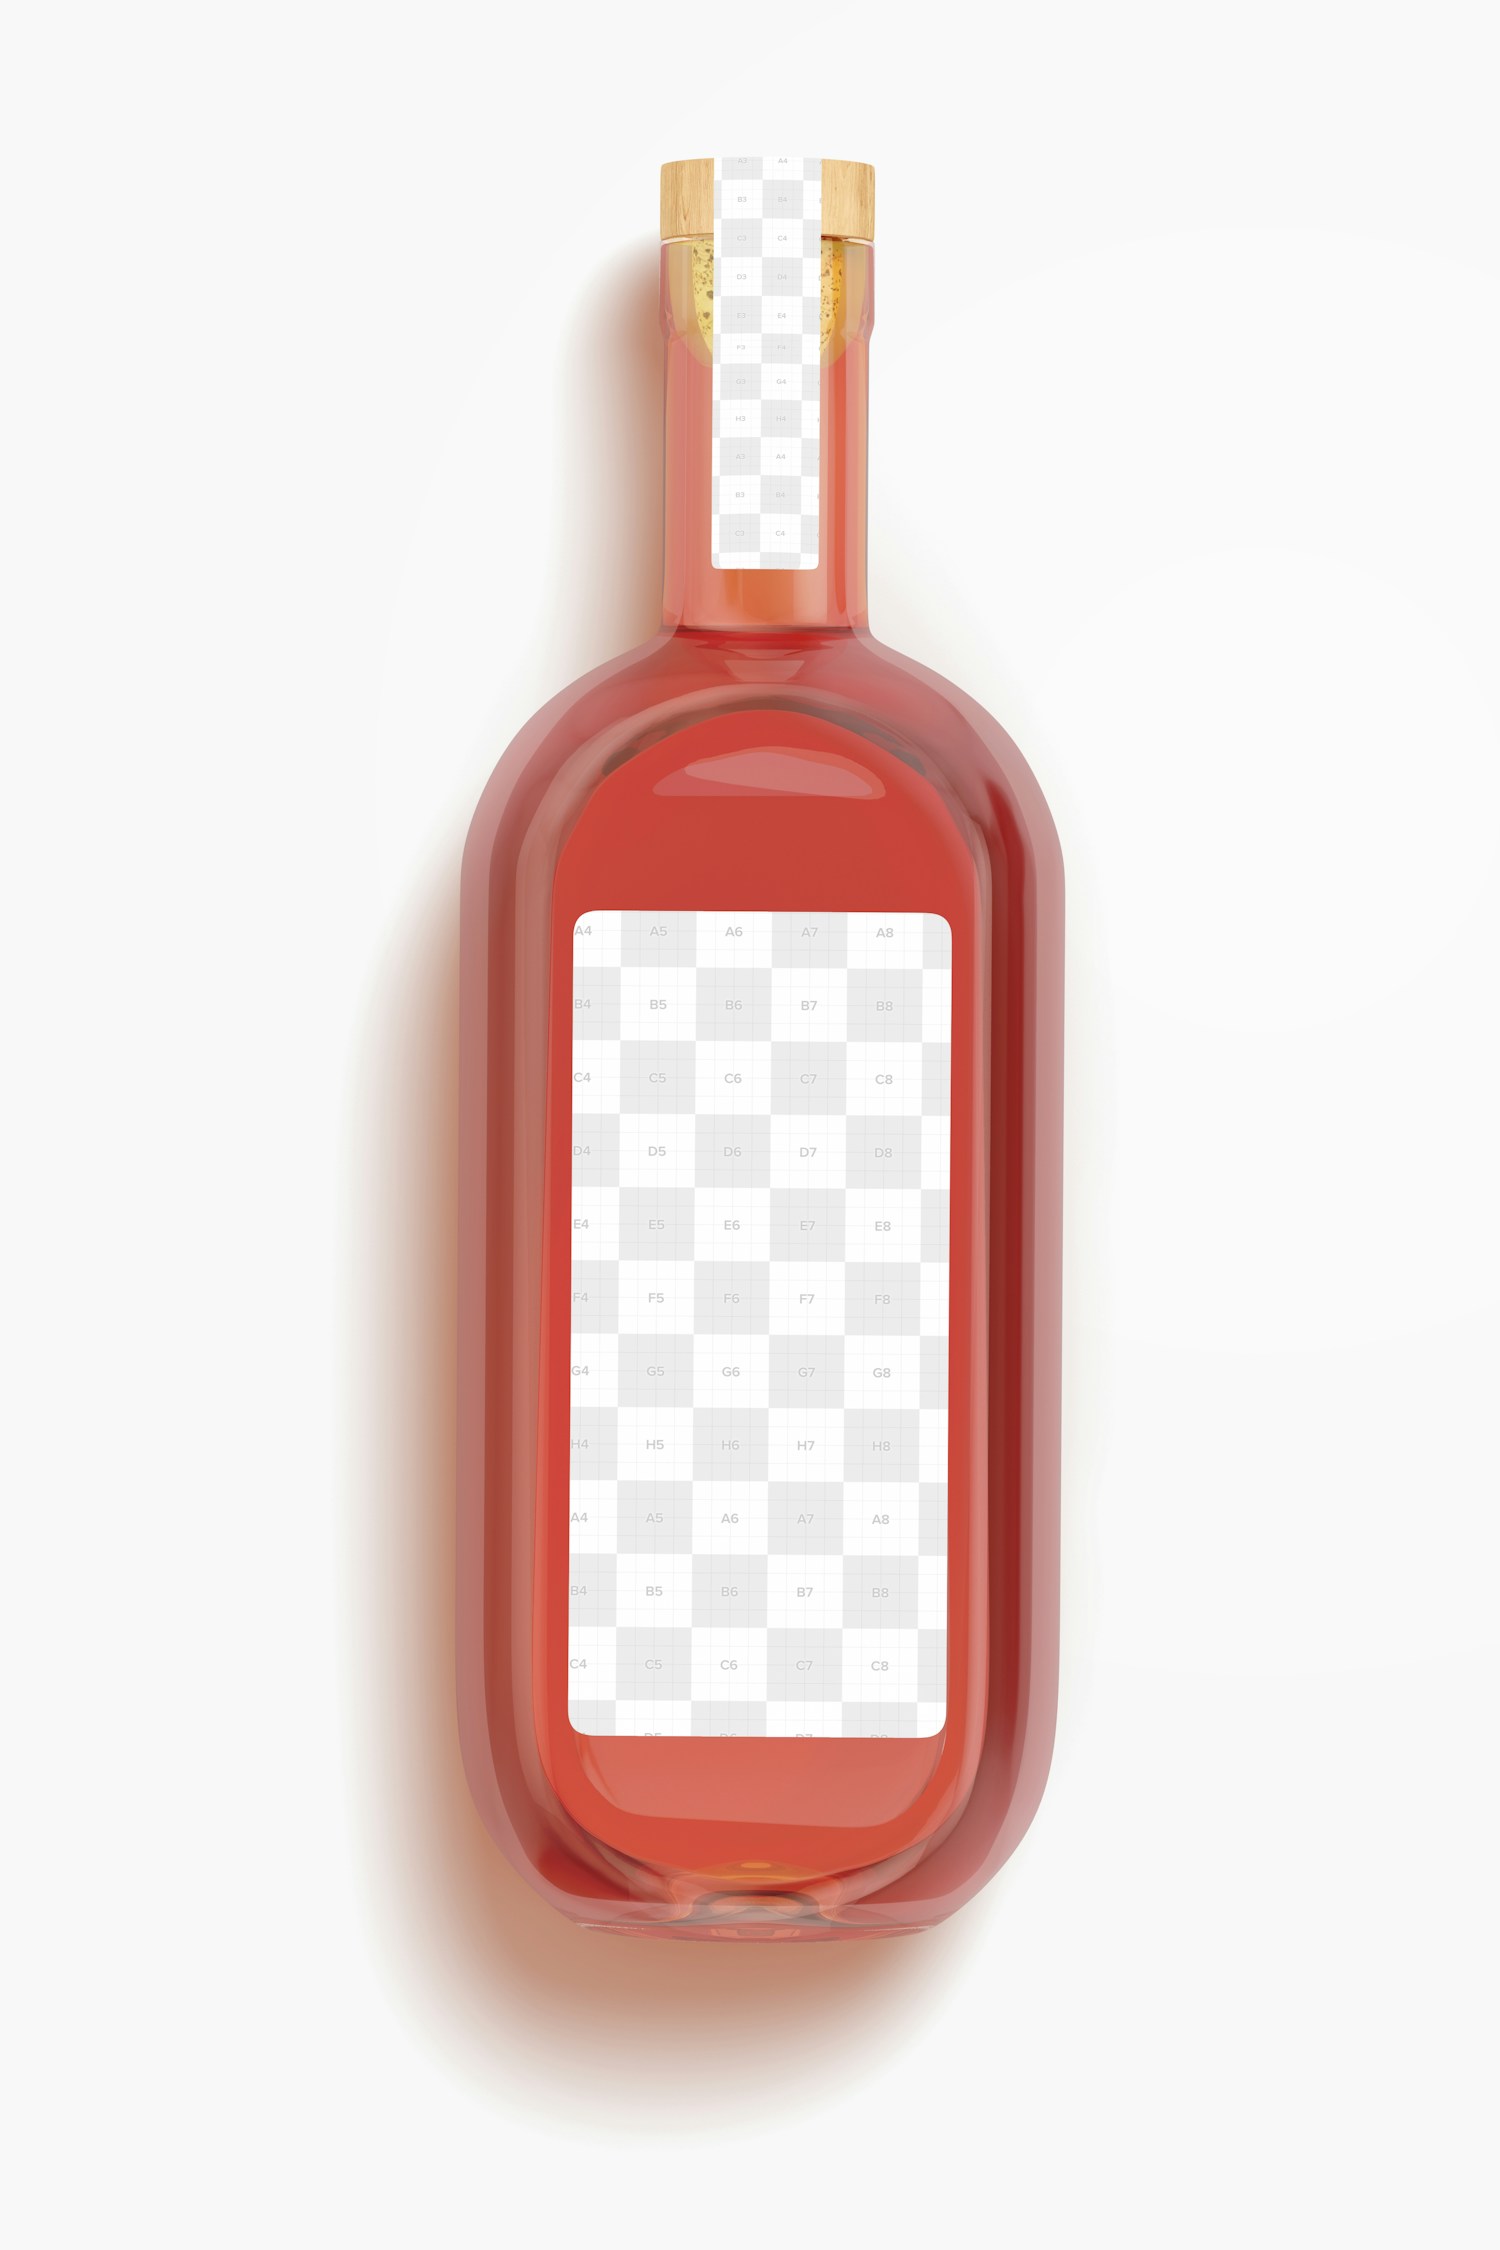 Whisky Bottle Mockup, Top View